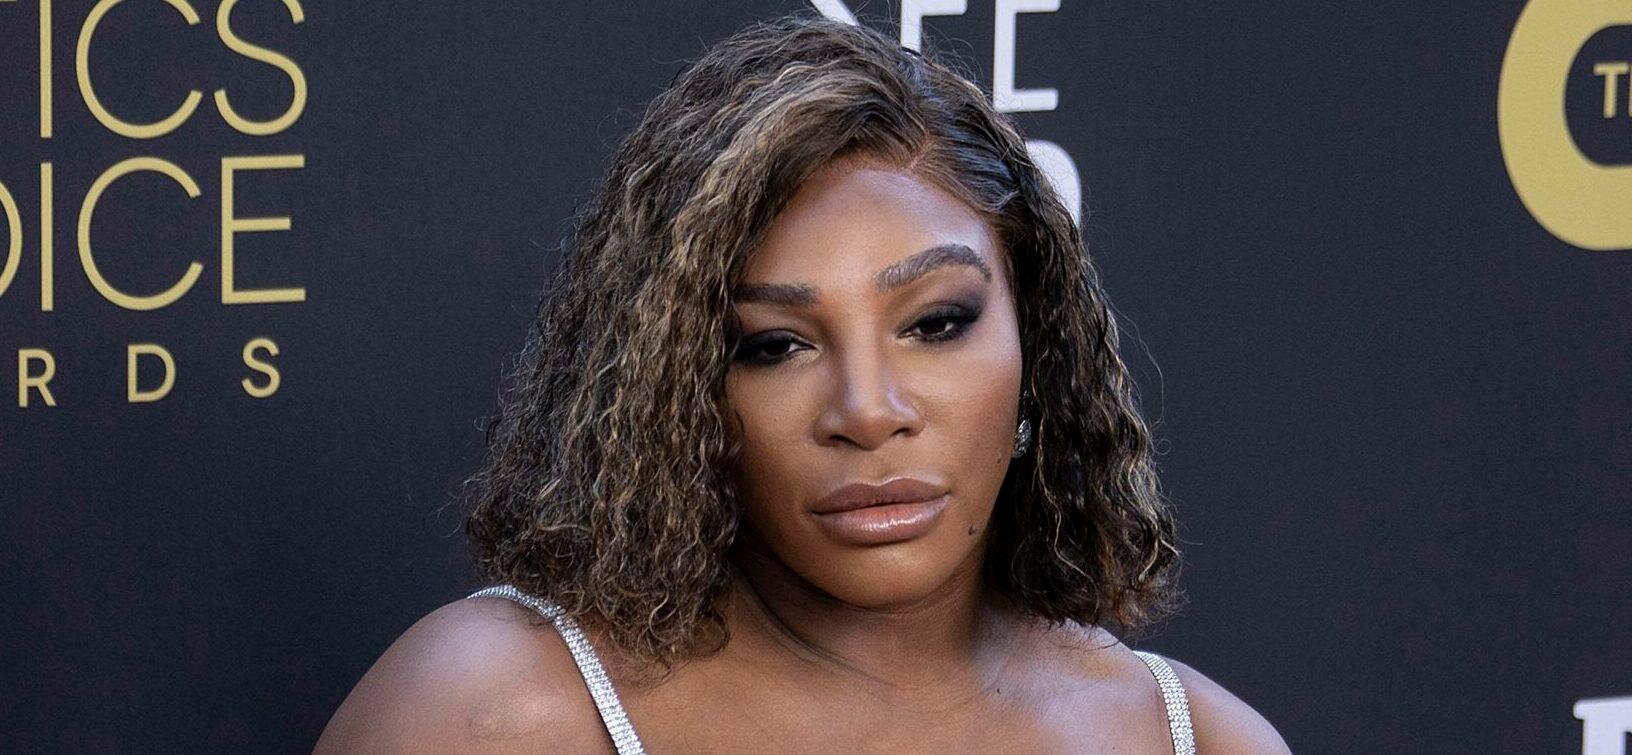 Serena Williams Proves She Is The Queen Of Transitions As Wimbledon 2022 Approaches